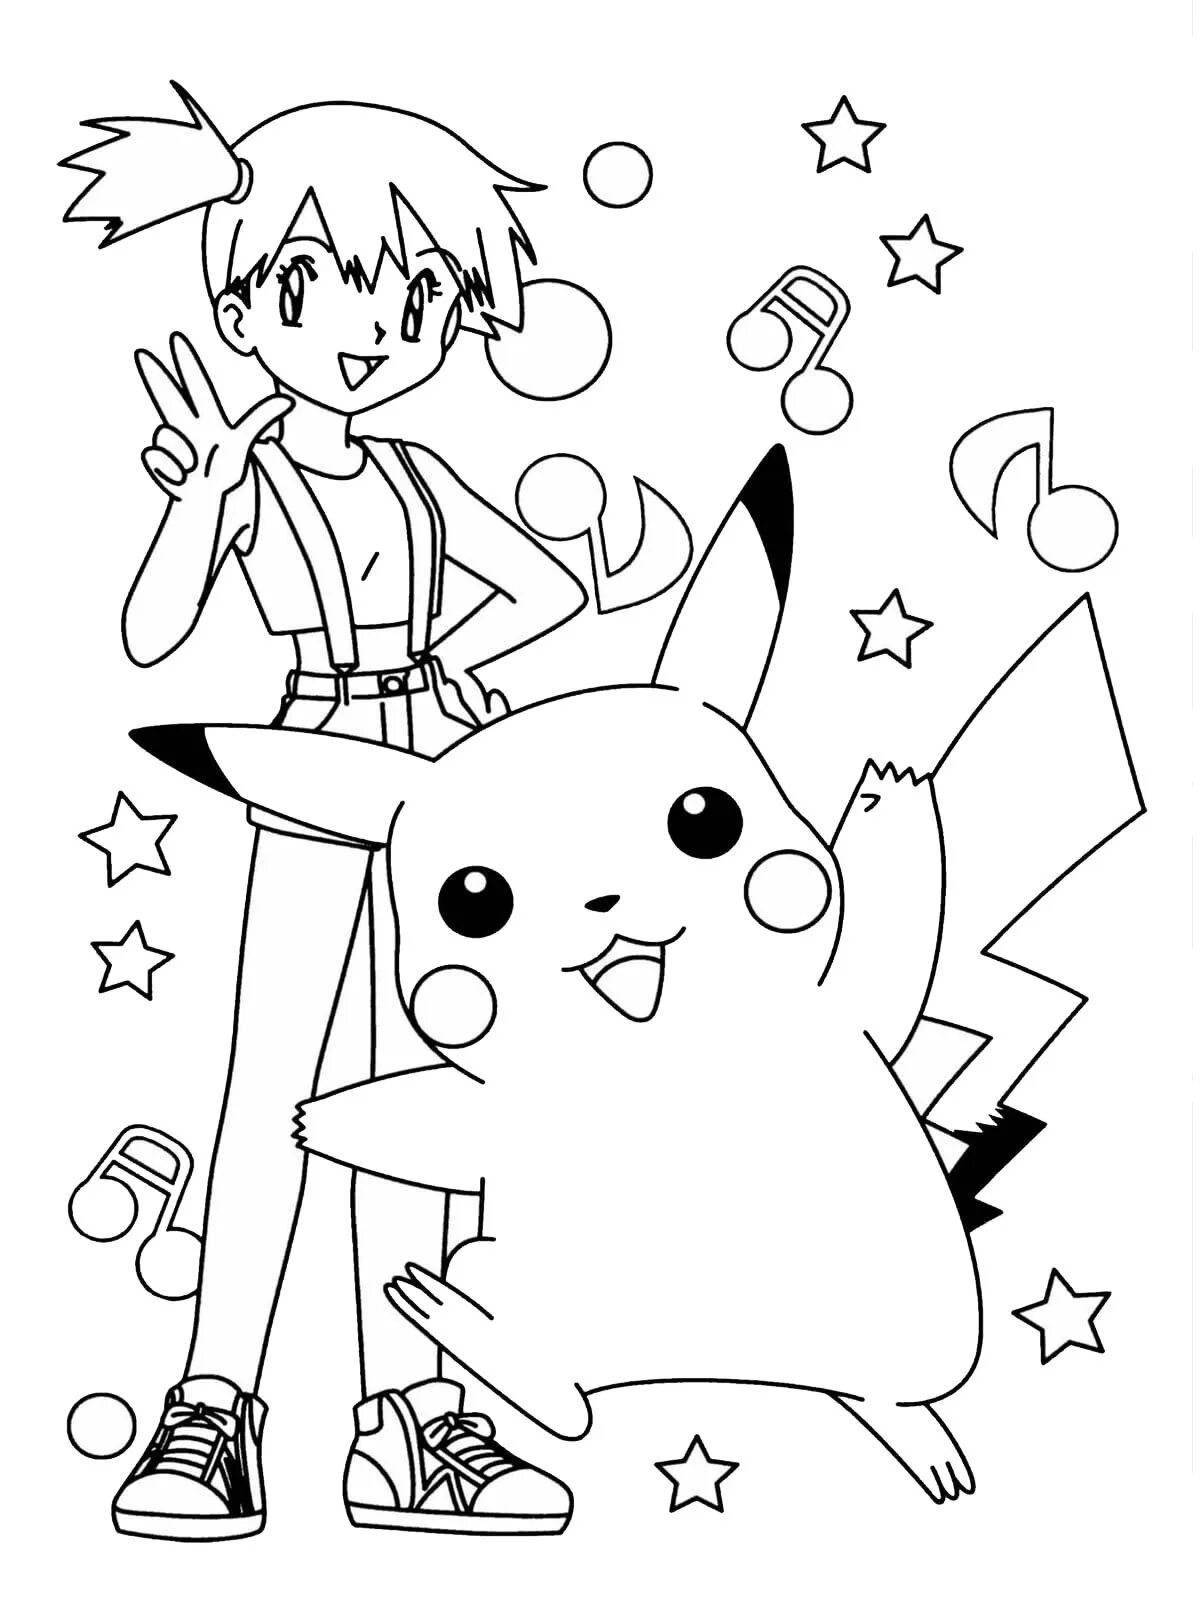 Exquisite pikachu print coloring page